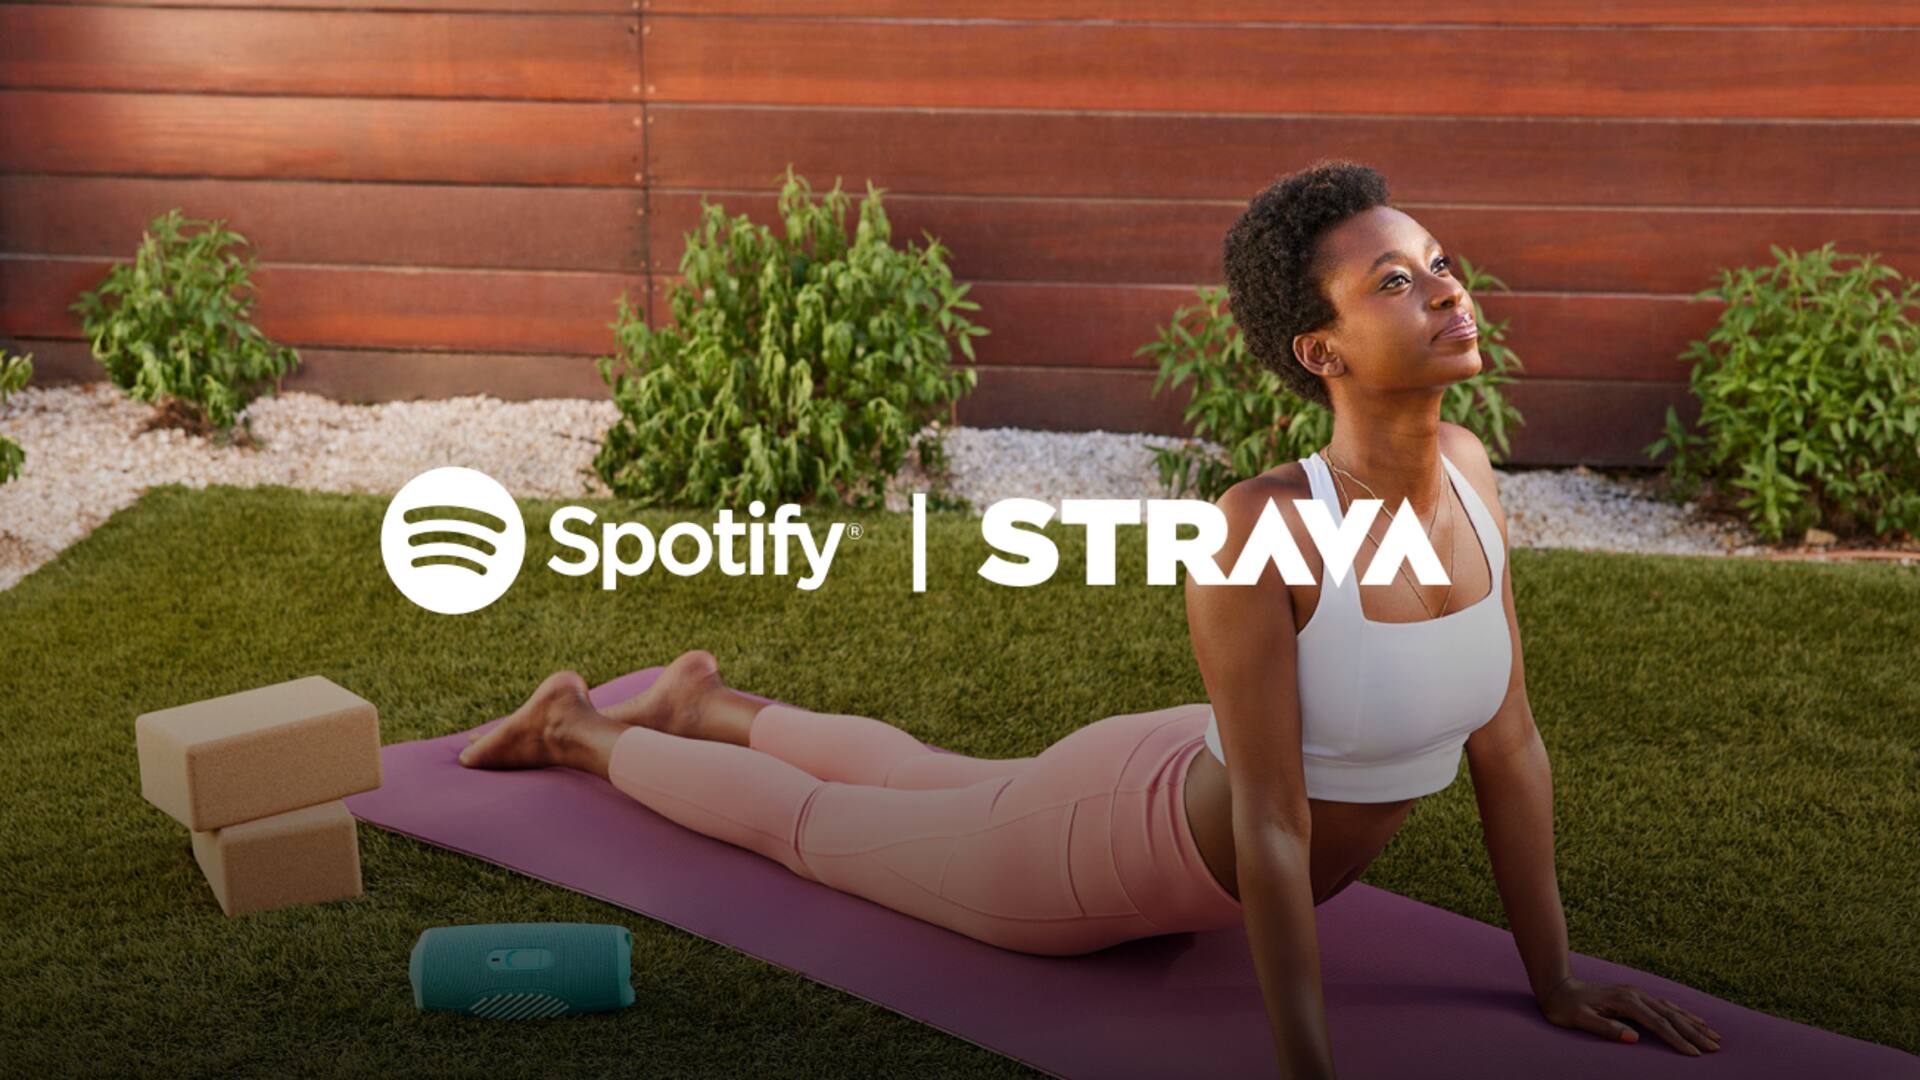 Now access Spotify music and podcasts on Strava: Here's how